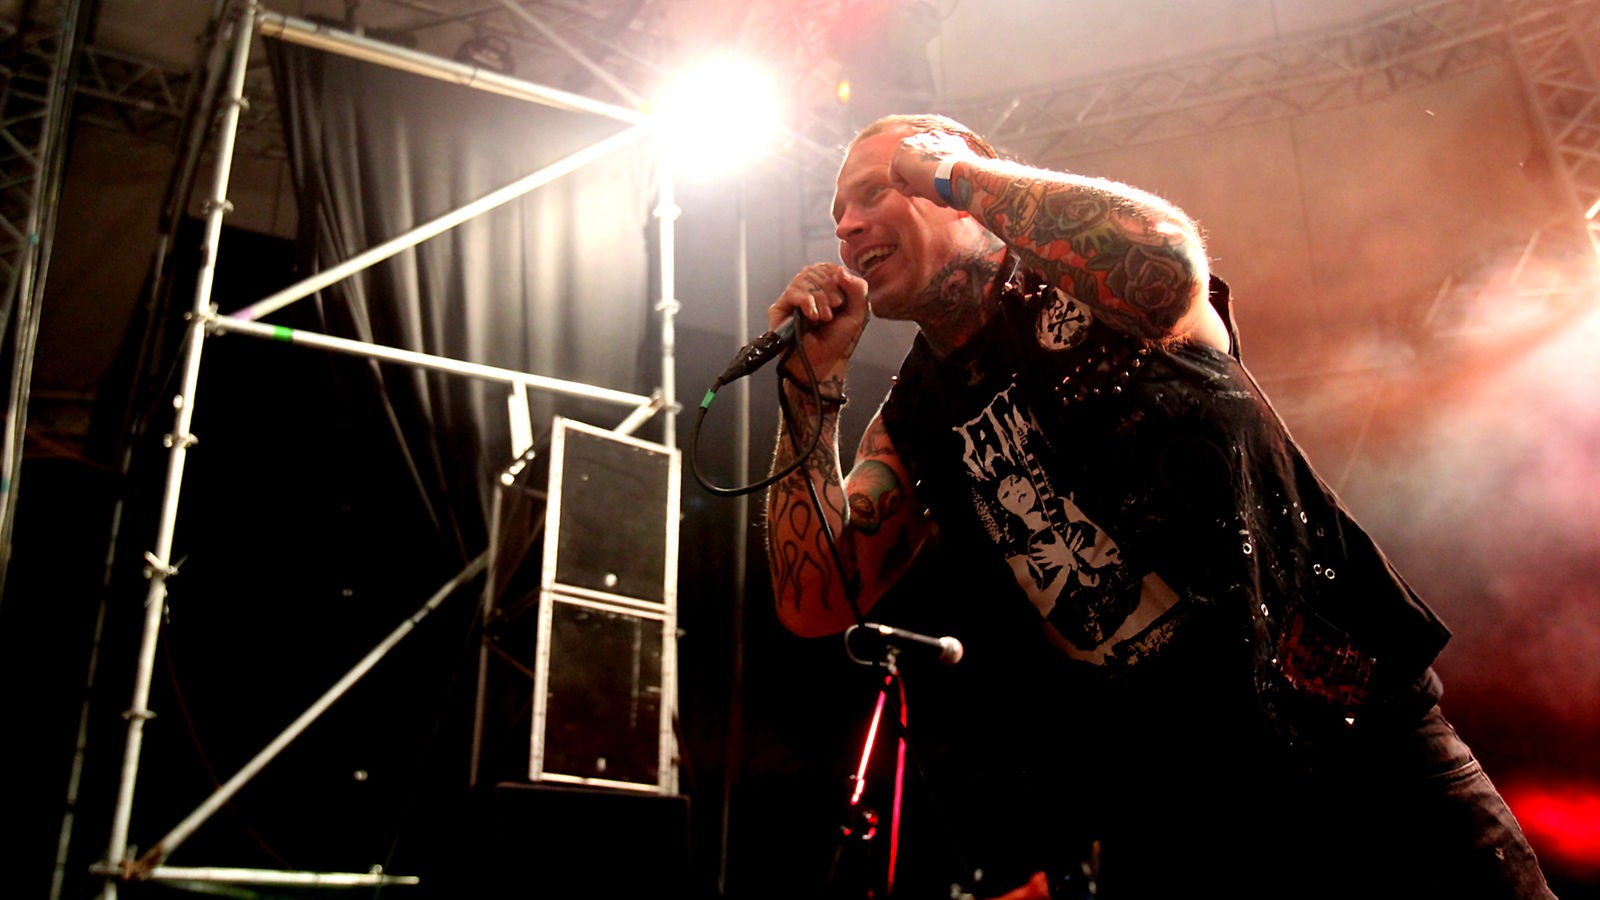 Combichrist Live Beim With Full Force Rockpalast Fernsehen Wdr